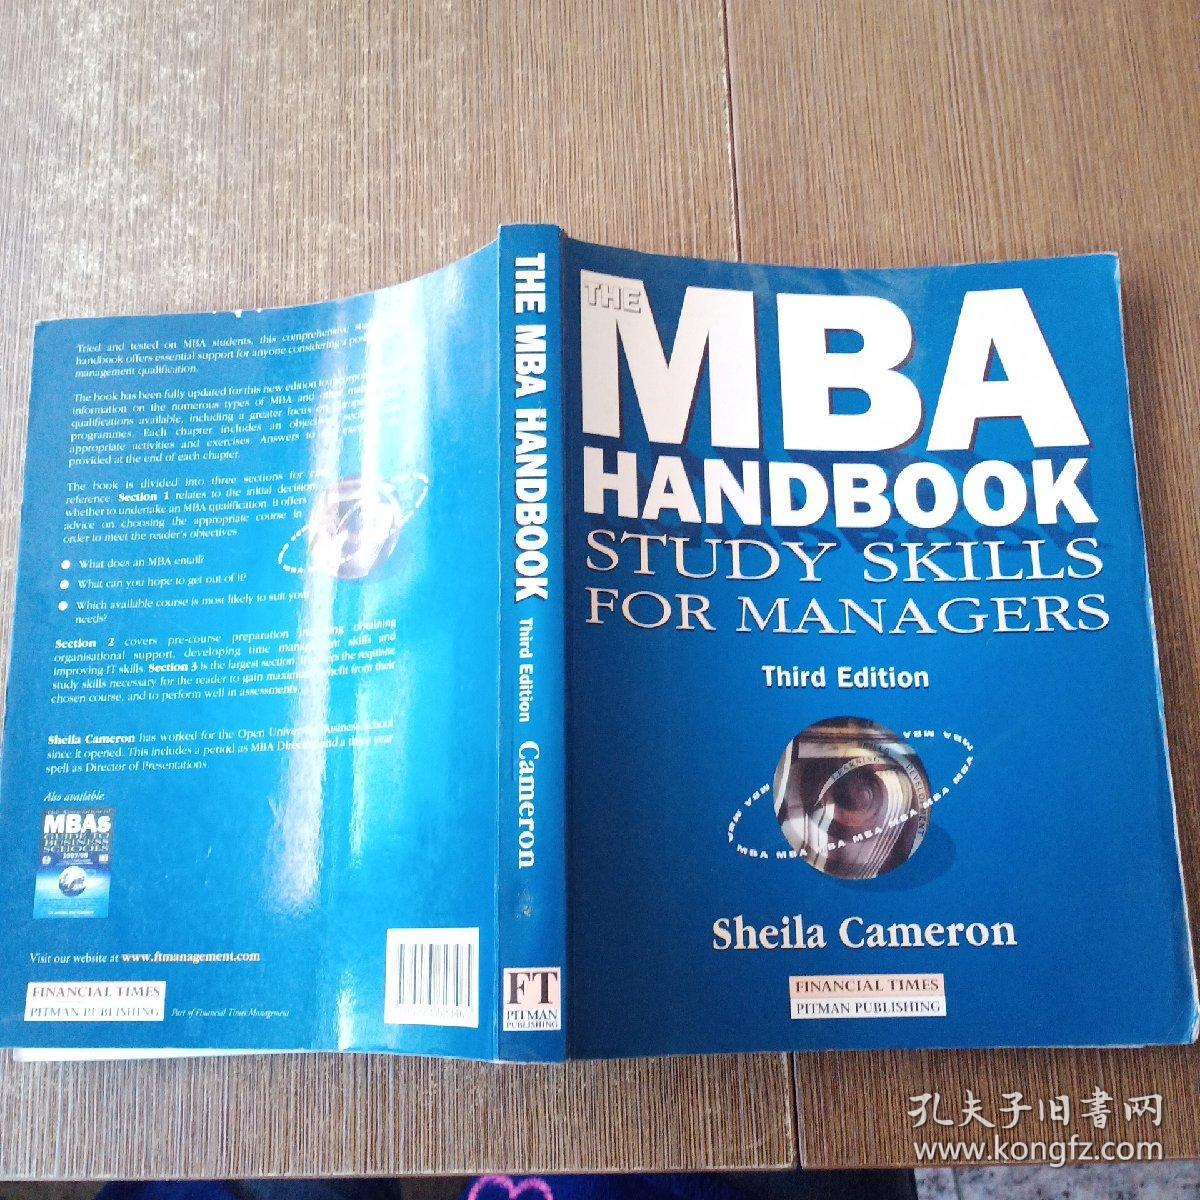 THE MBA HANDBOOK STUDY SKILLS FOR MANAGERS   请看图